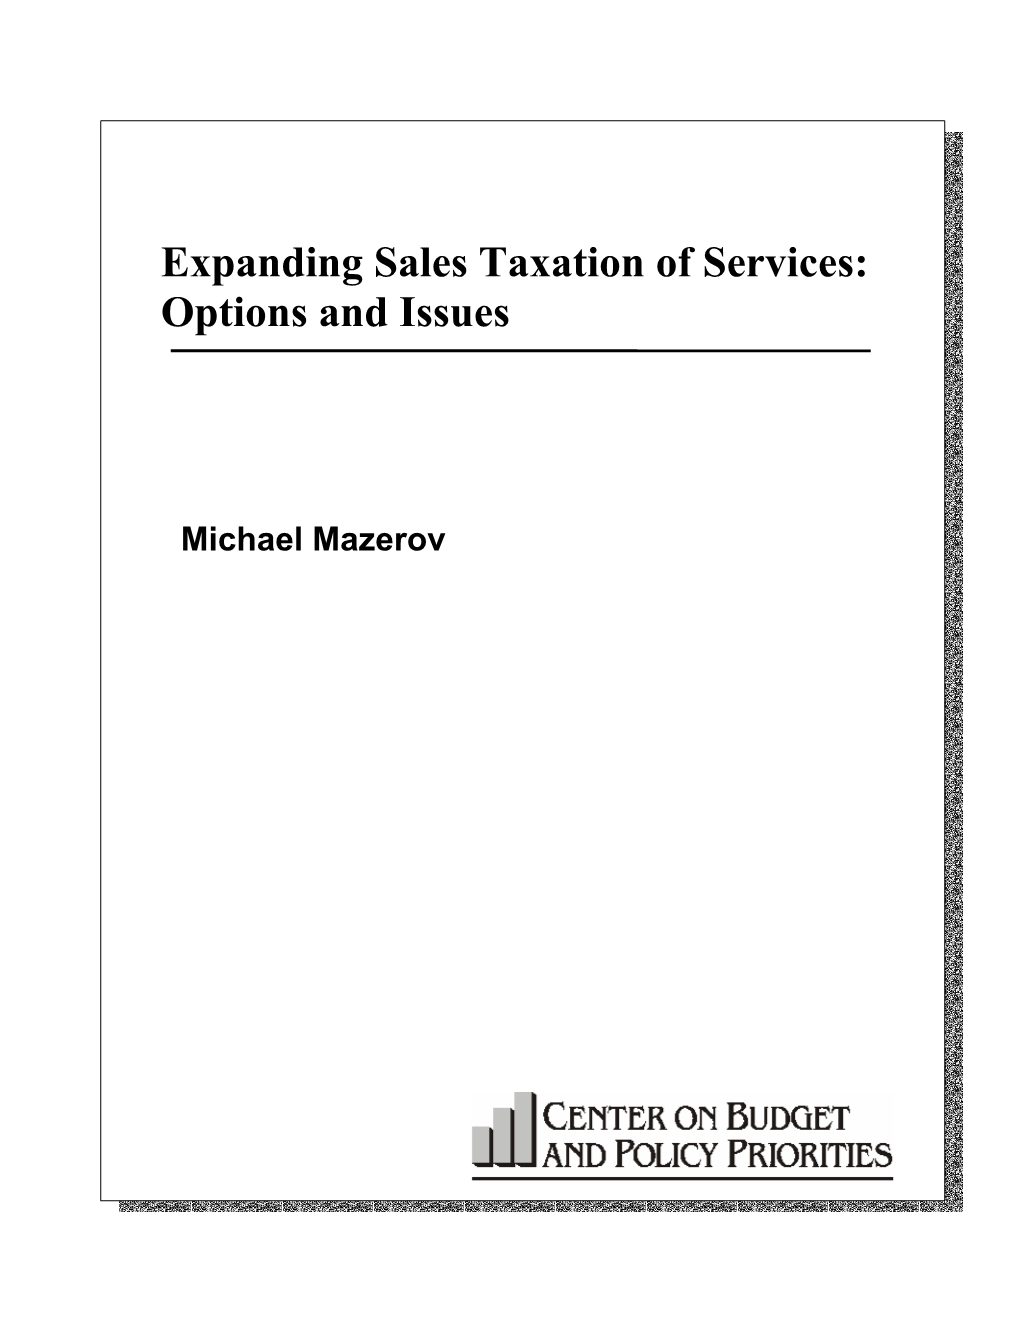 Expanding Sales Taxation of Services: Options and Issues